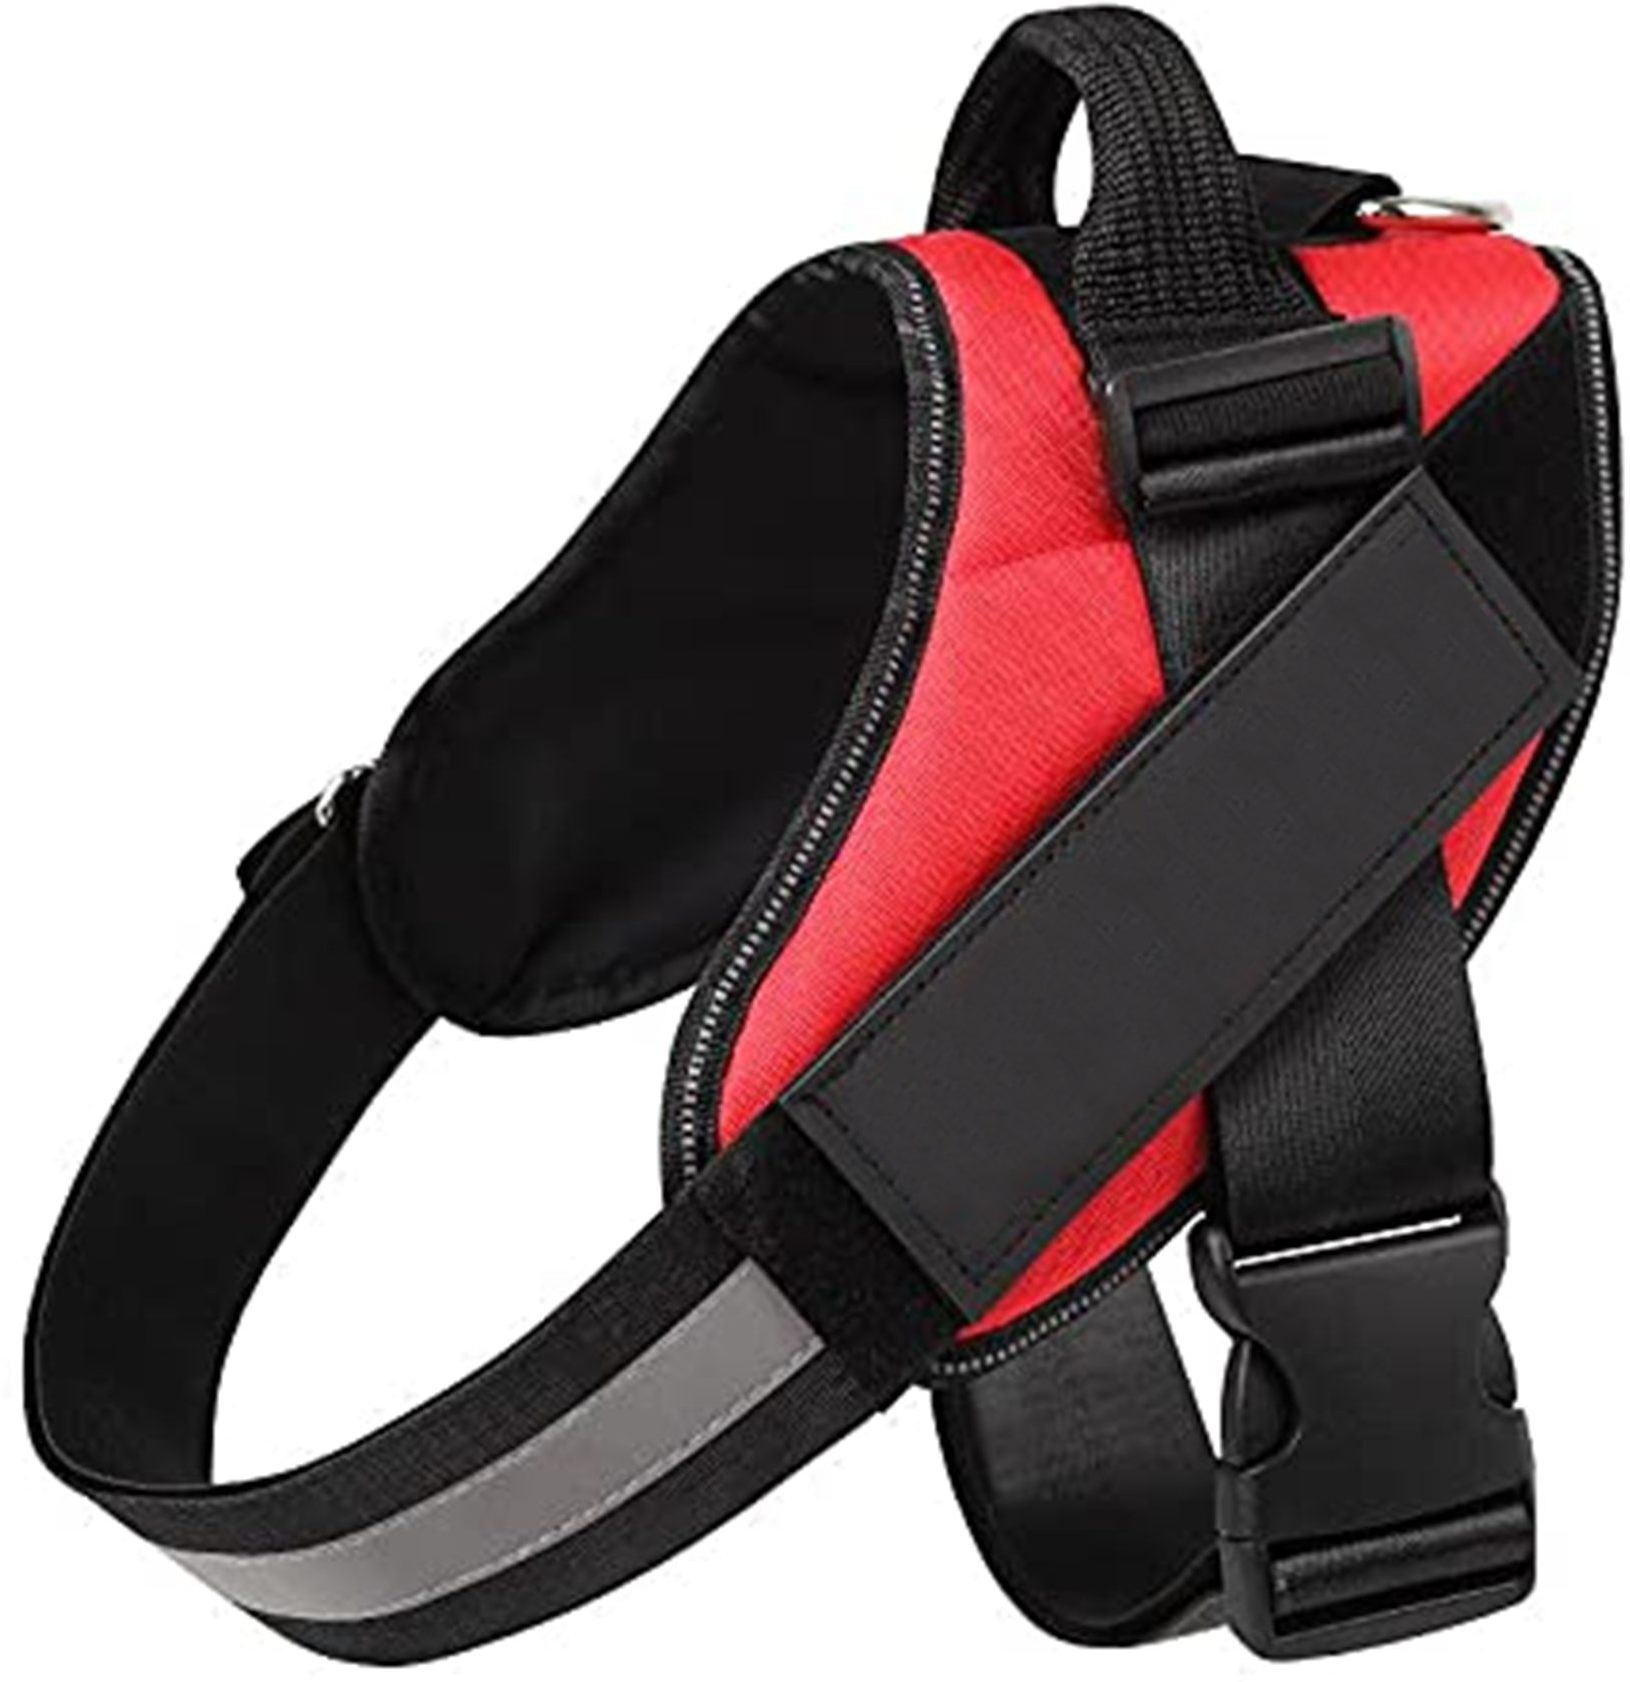 Premiuim Quality No Pull Standard Dog Harness With Reflective Strip